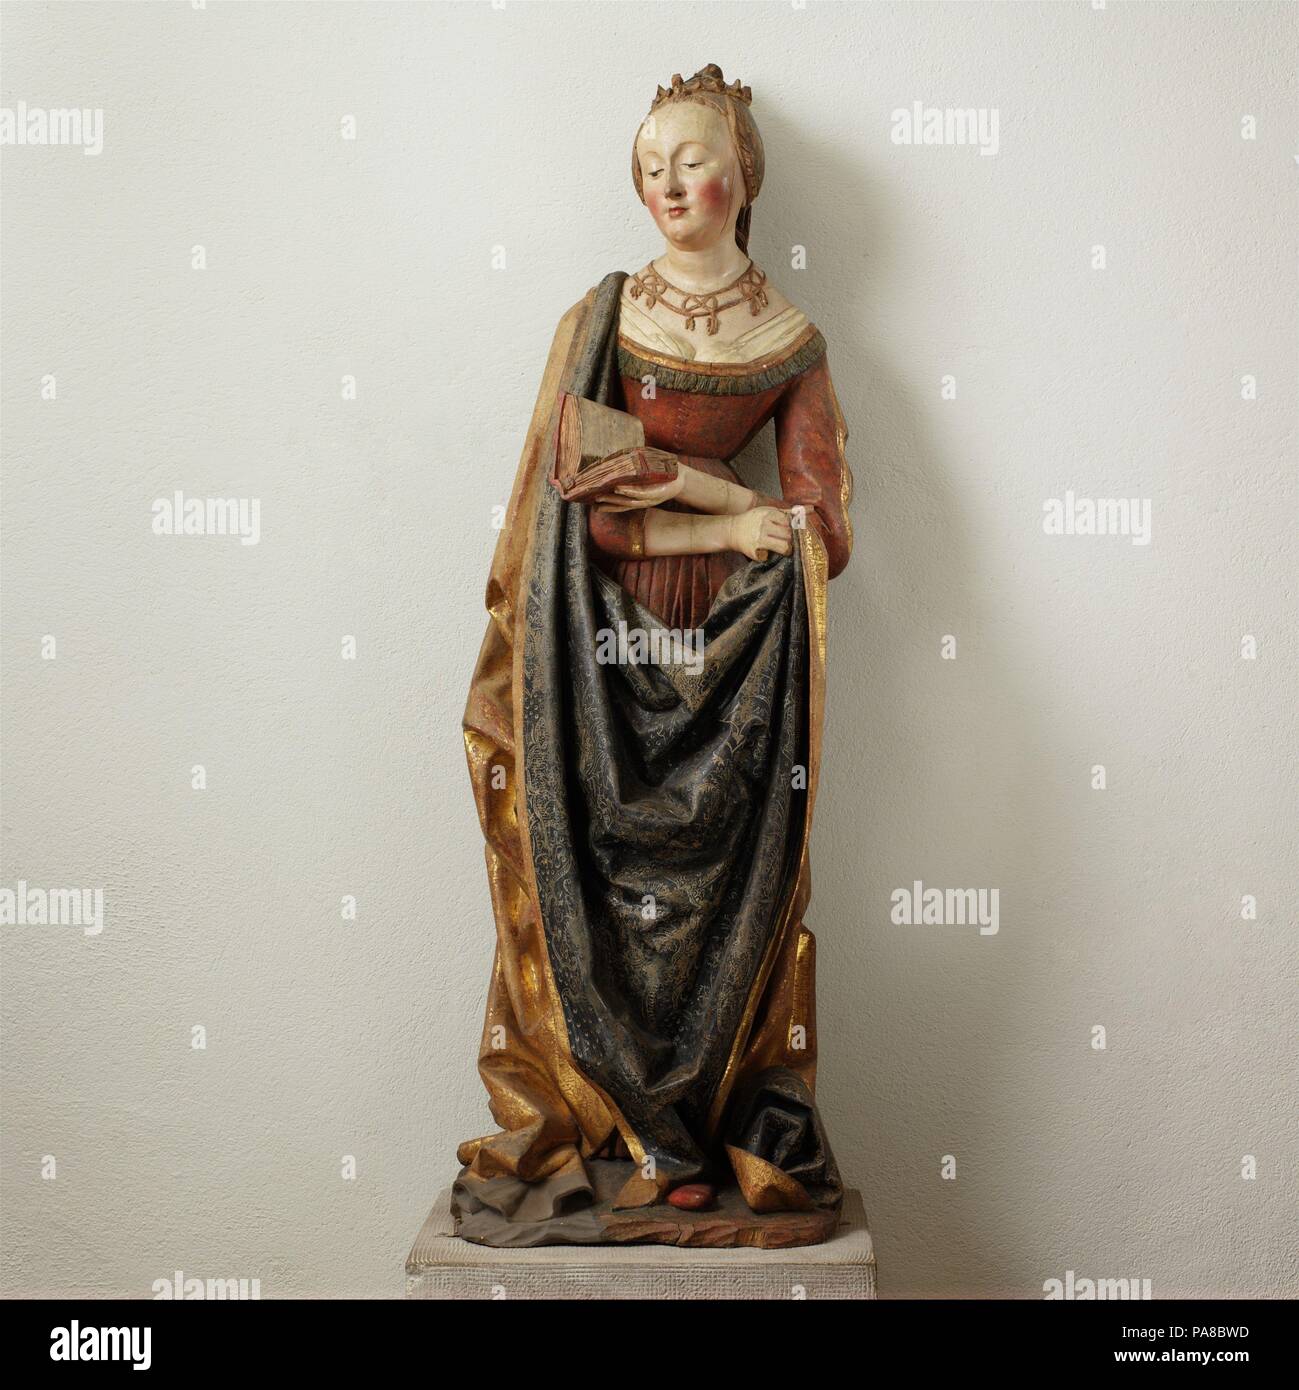 Saint Barbara. Culture: German. Dimensions: 50 1/4 × 17 × 13 1/4 in., 63 lb. (127.6 × 43.2 × 33.7 cm, 28576.613g). Date: ca. 1490.  This well-preserved figure of Saint Barbara came from the central shrine of the high altarpiece of the church of Saint Mauritius on the east side of the Rhine River, south of Strasbourg. The central shrine was dismantled prior to the early seventeenth century, and the sculptures were consigned to the charnel house in Kippenheim. The now-dispersed figures and the painted wings have survived, allowing for the reconstruction of the altarpiece. Dedicated to the Virgin Stock Photo